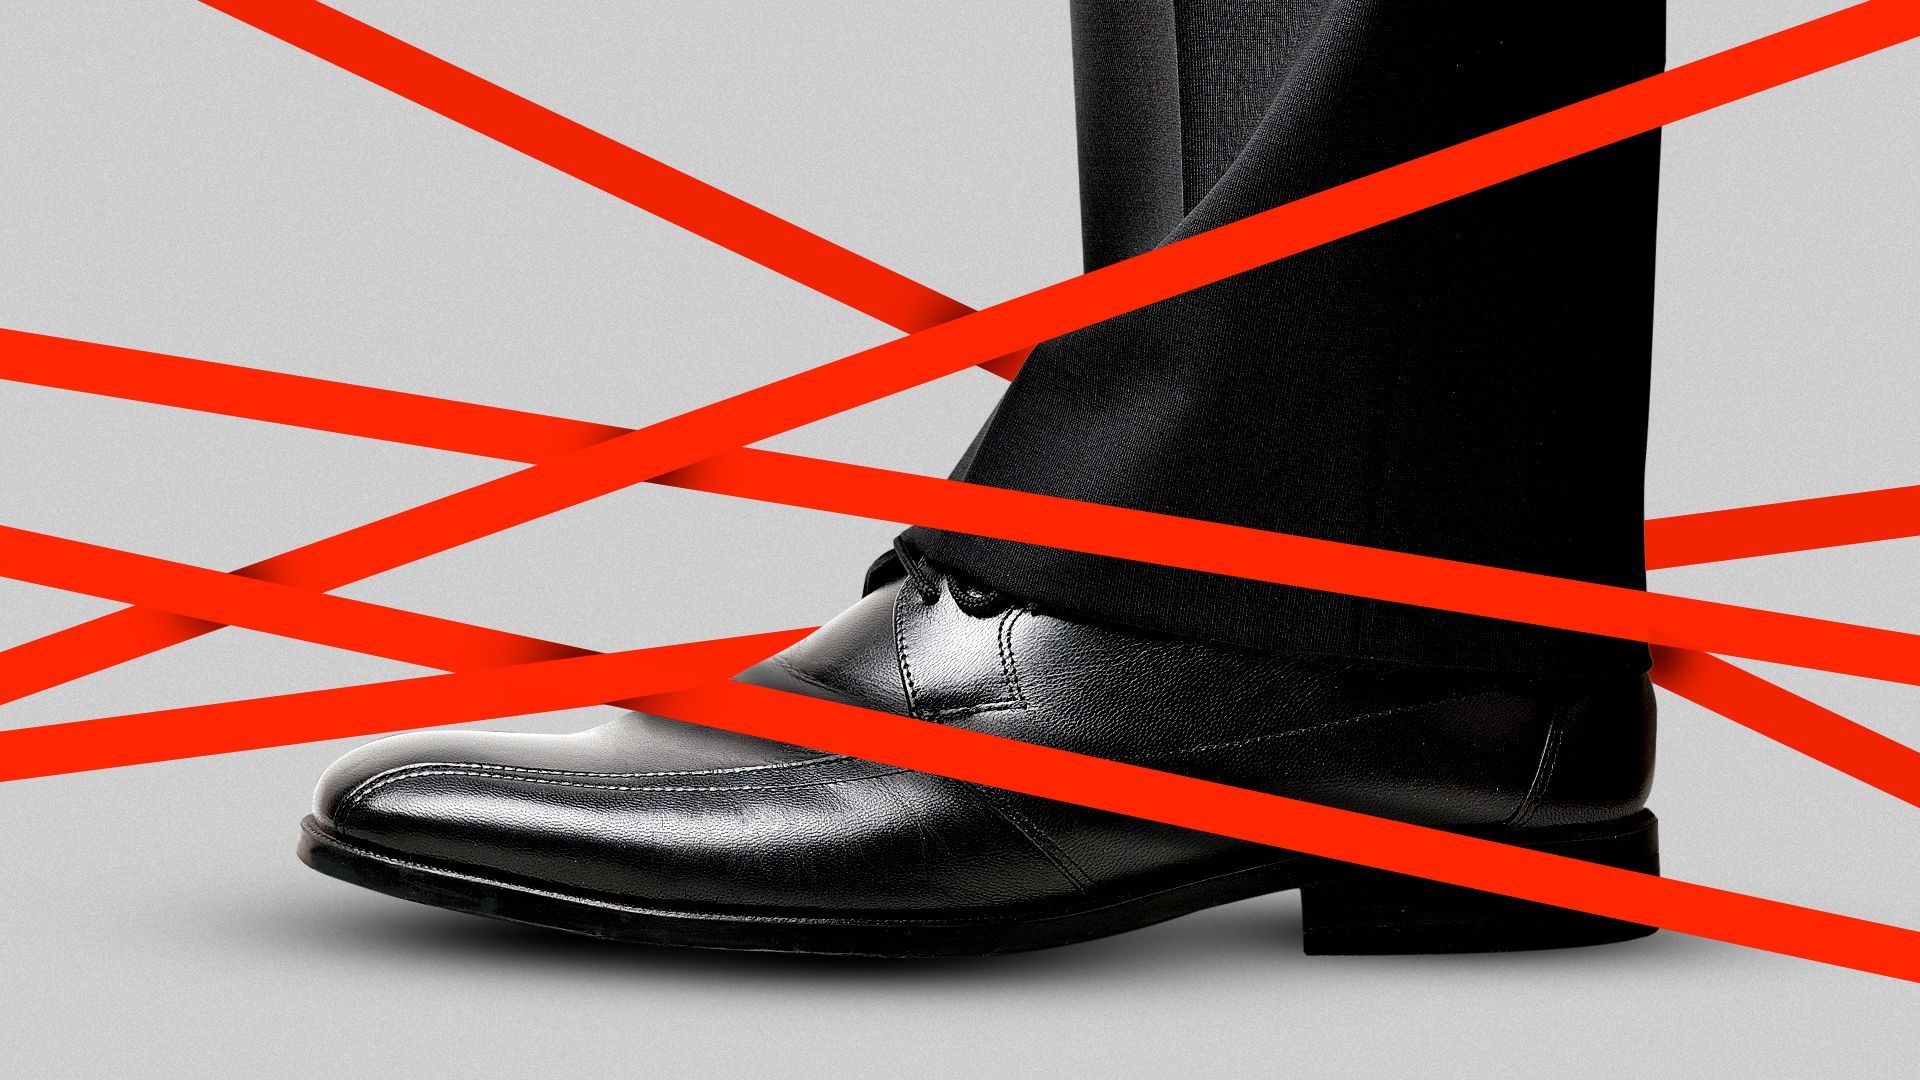 Illustration of a large shoe surrounded by red tape. 